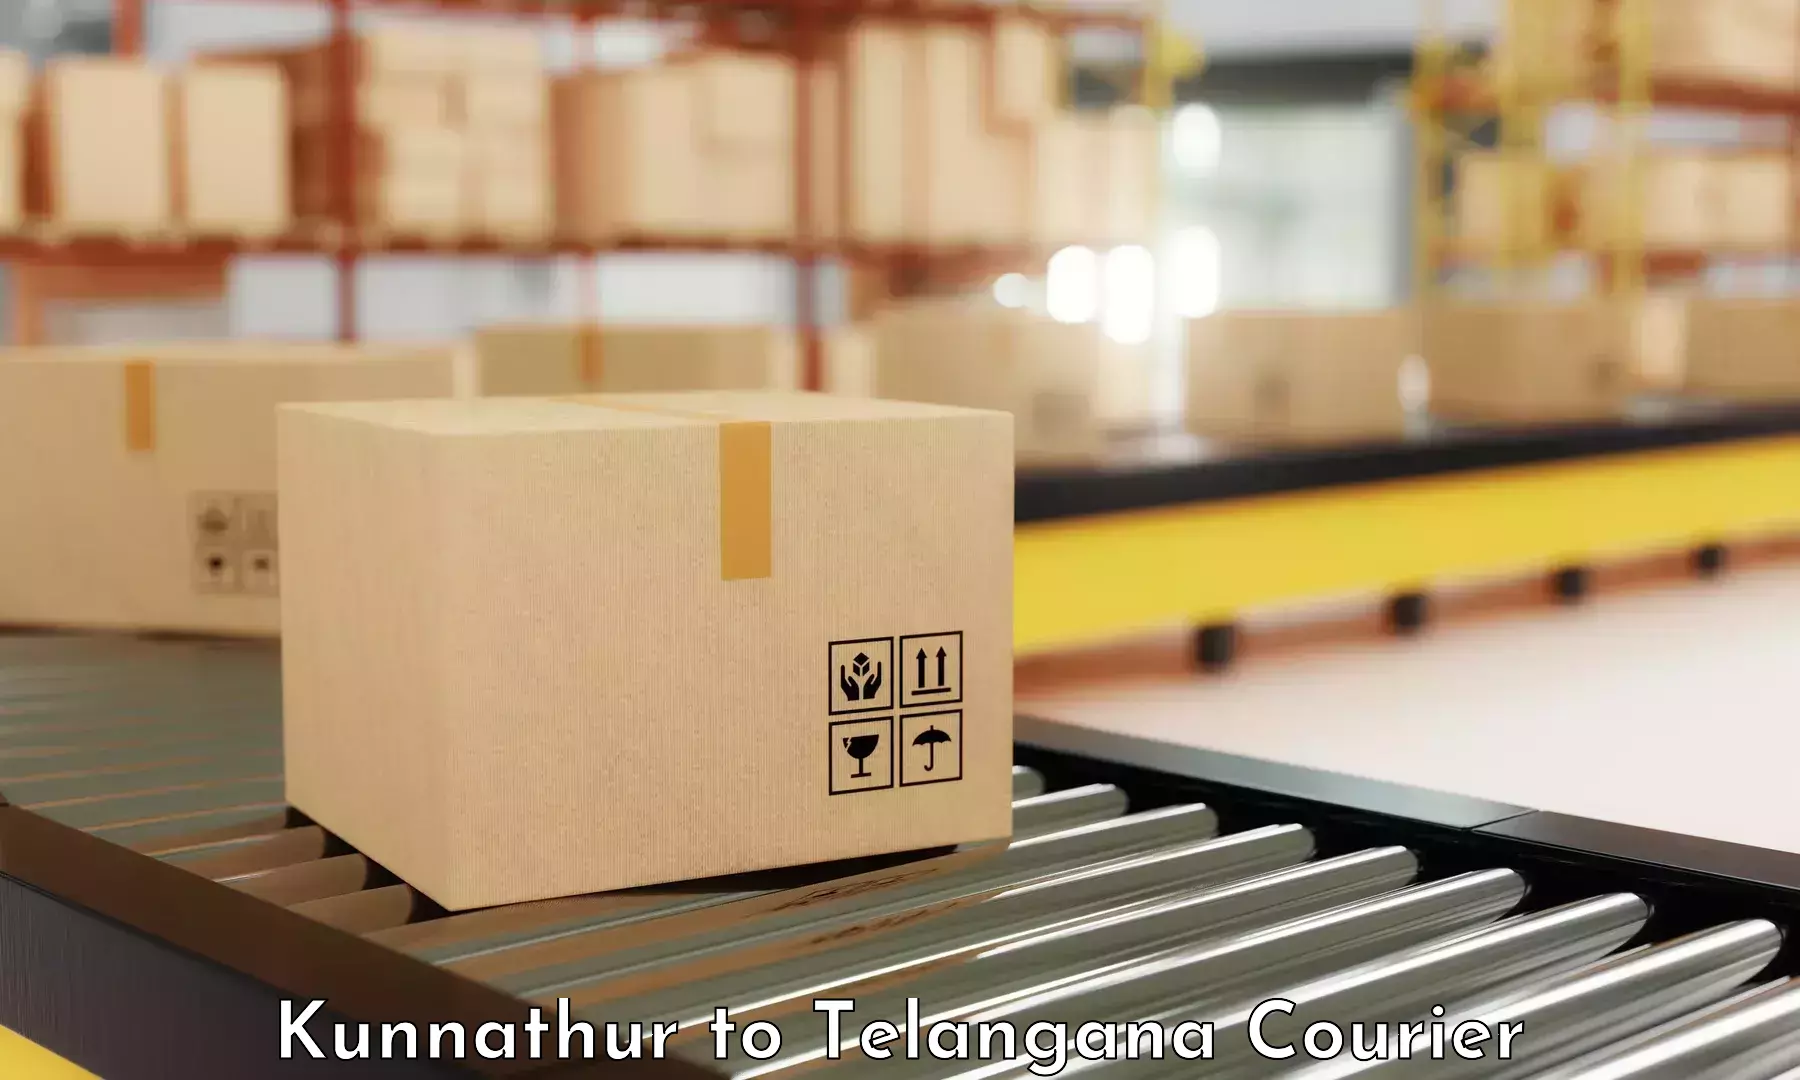 Customer-centric shipping Kunnathur to Trimulgherry